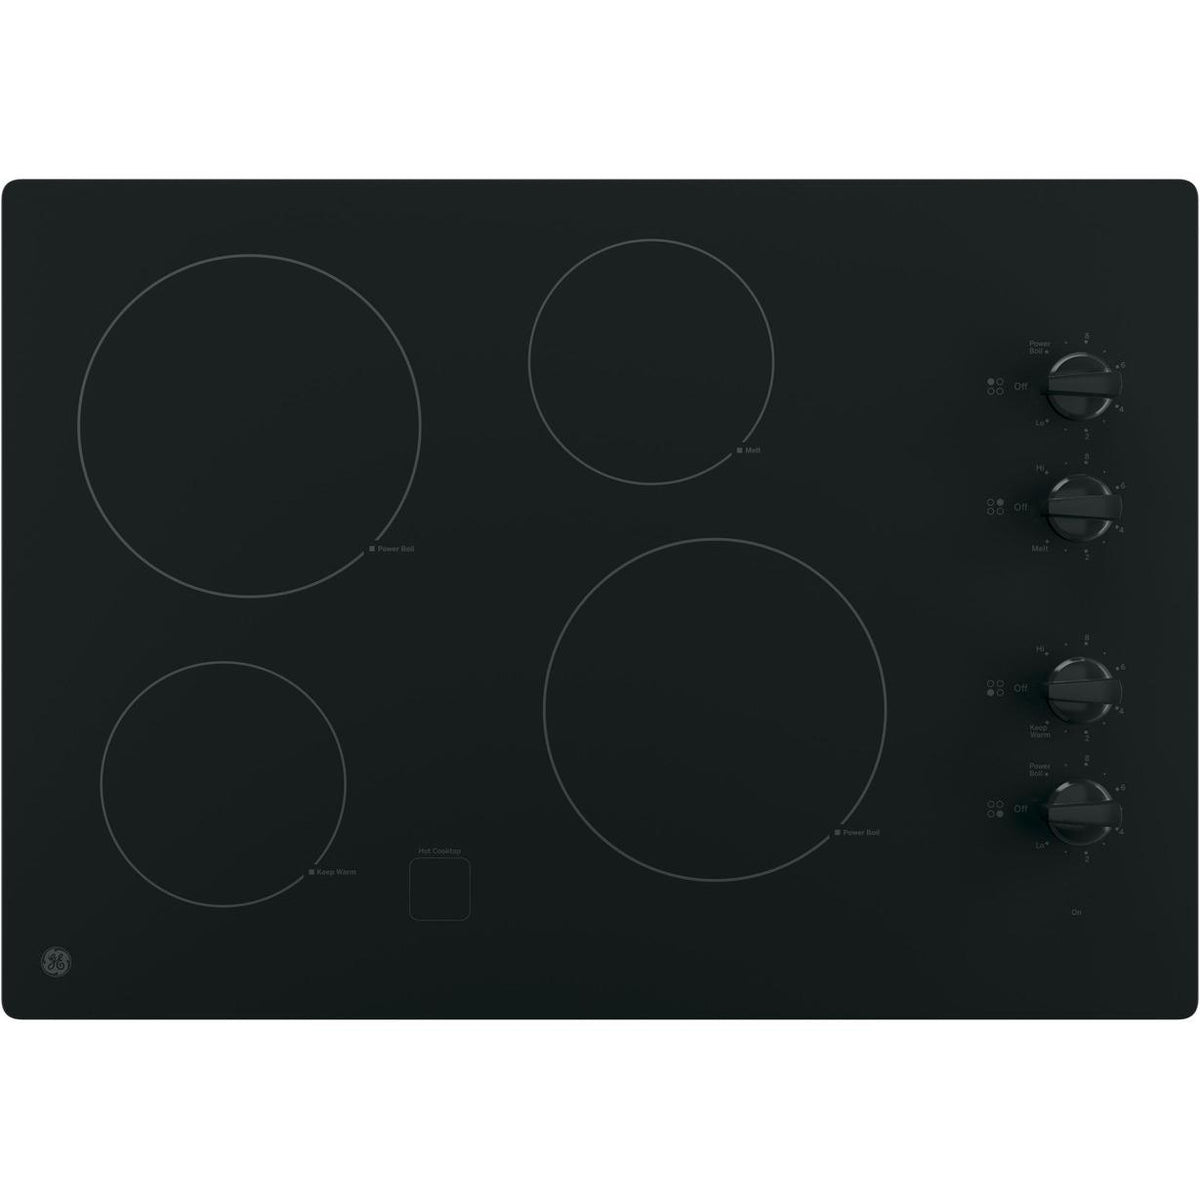 30-inch Built-in Electric Cooktop JP3030DWBB IMAGE 1